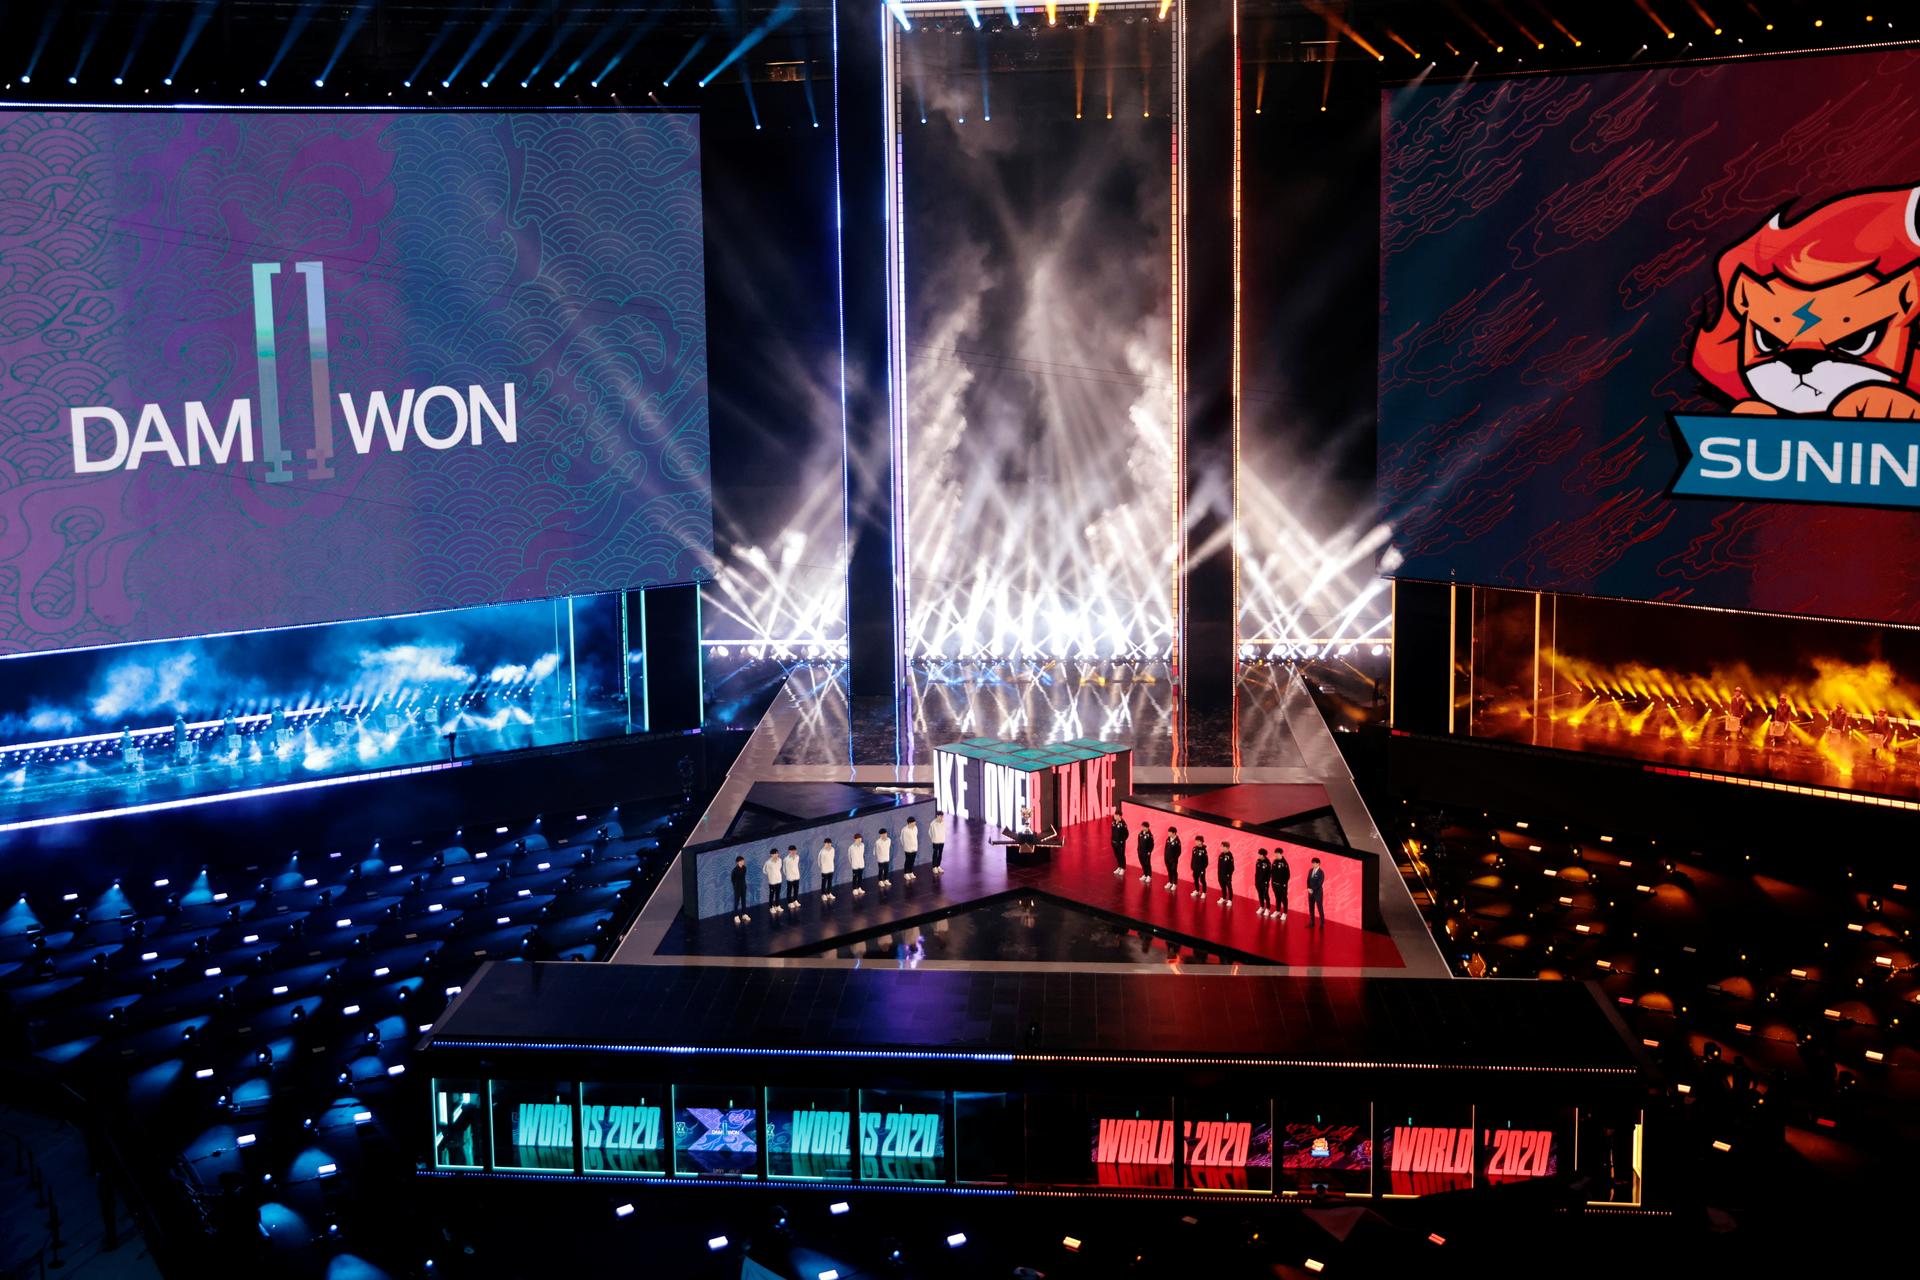 A huge stadium with blue, white and red lights features competitive esports players on stage.